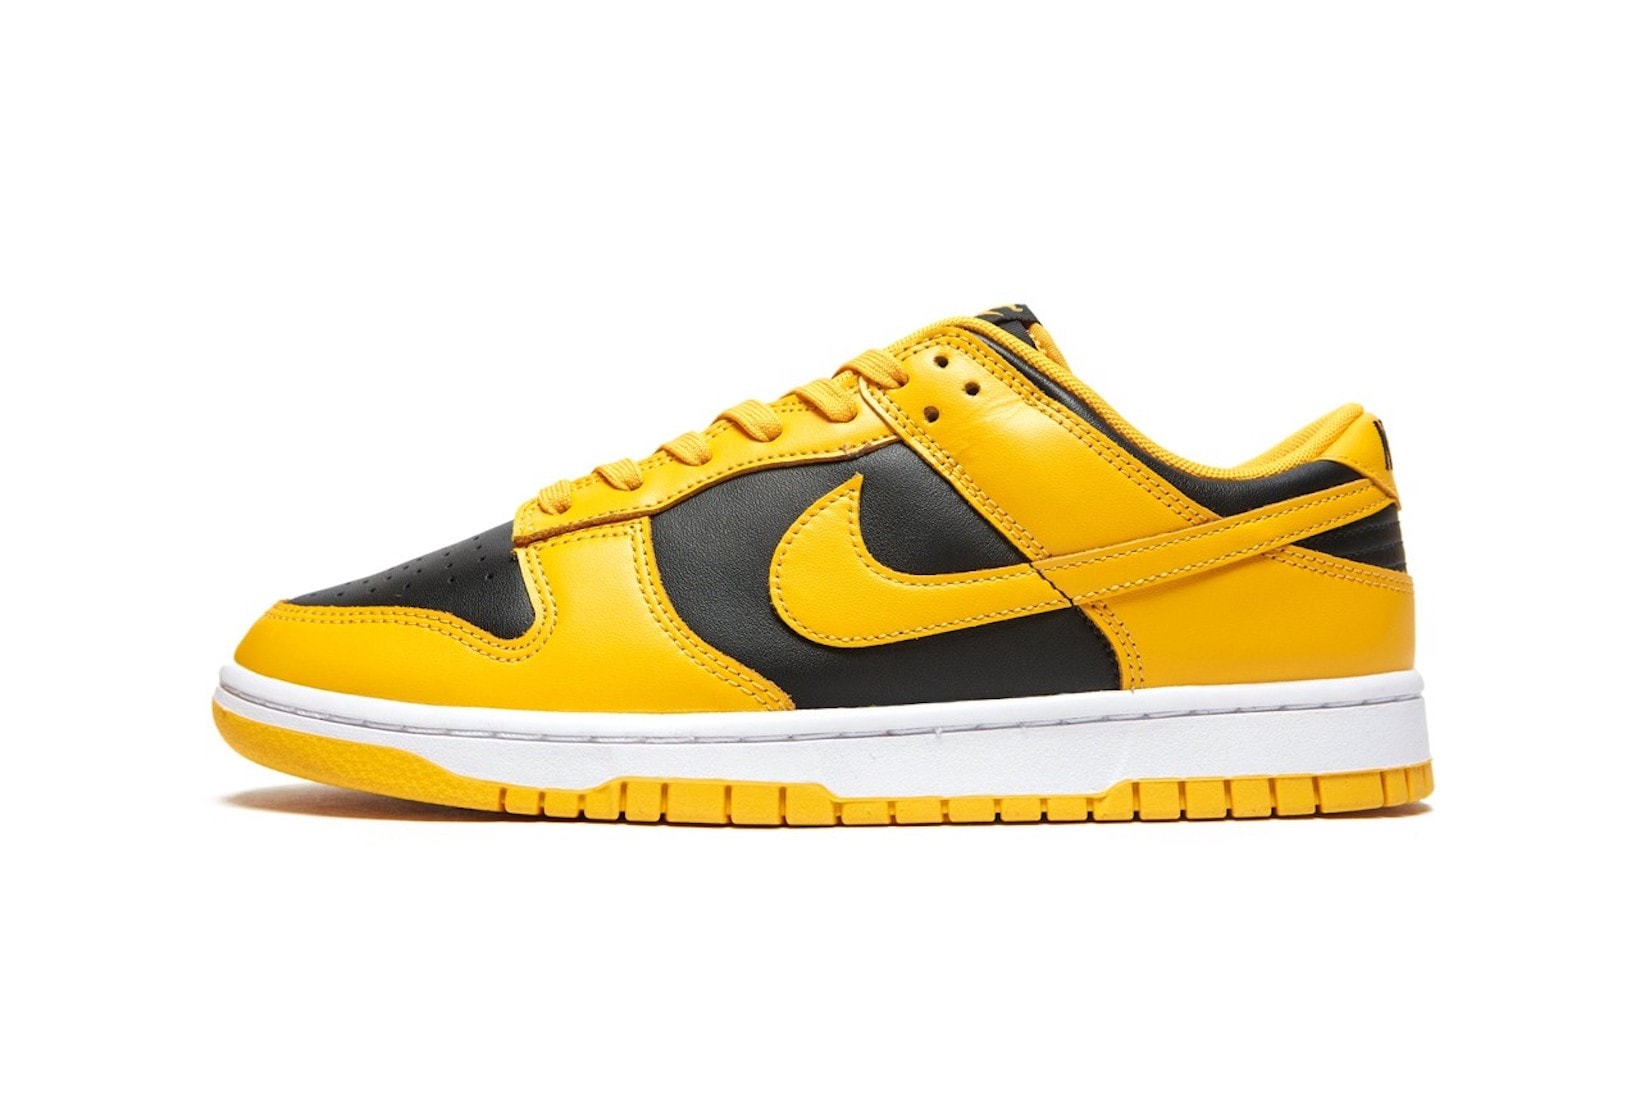 nike dunk low sneakers goldenrod yellow black white footwear shoes kicks lateral